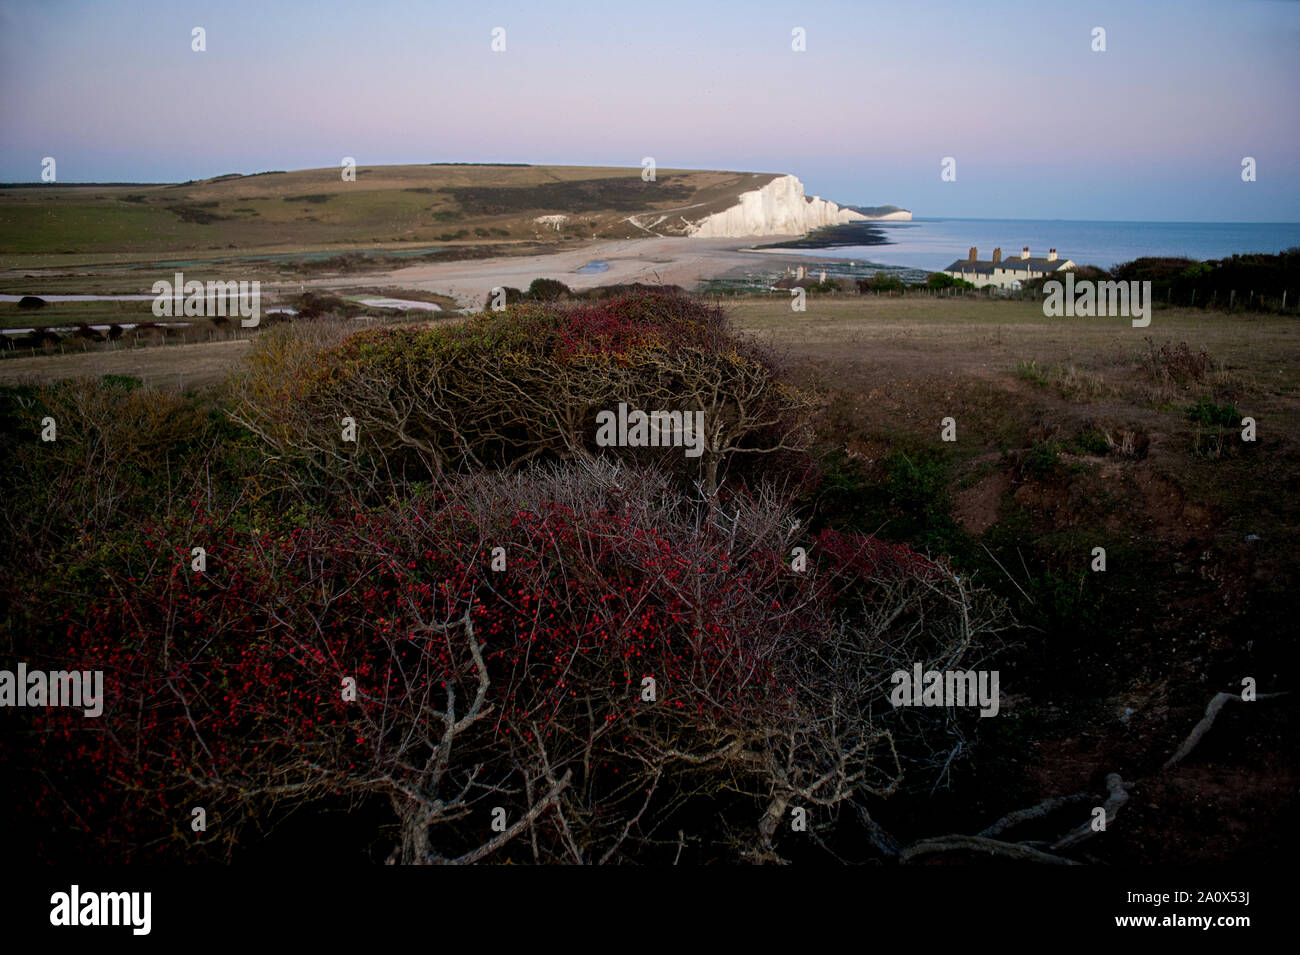 A dramatic view of the Seven Sisters country park and windswept trees. The Seven Sisters in Sussex, England are a series of white chalk cliffs. Stock Photo